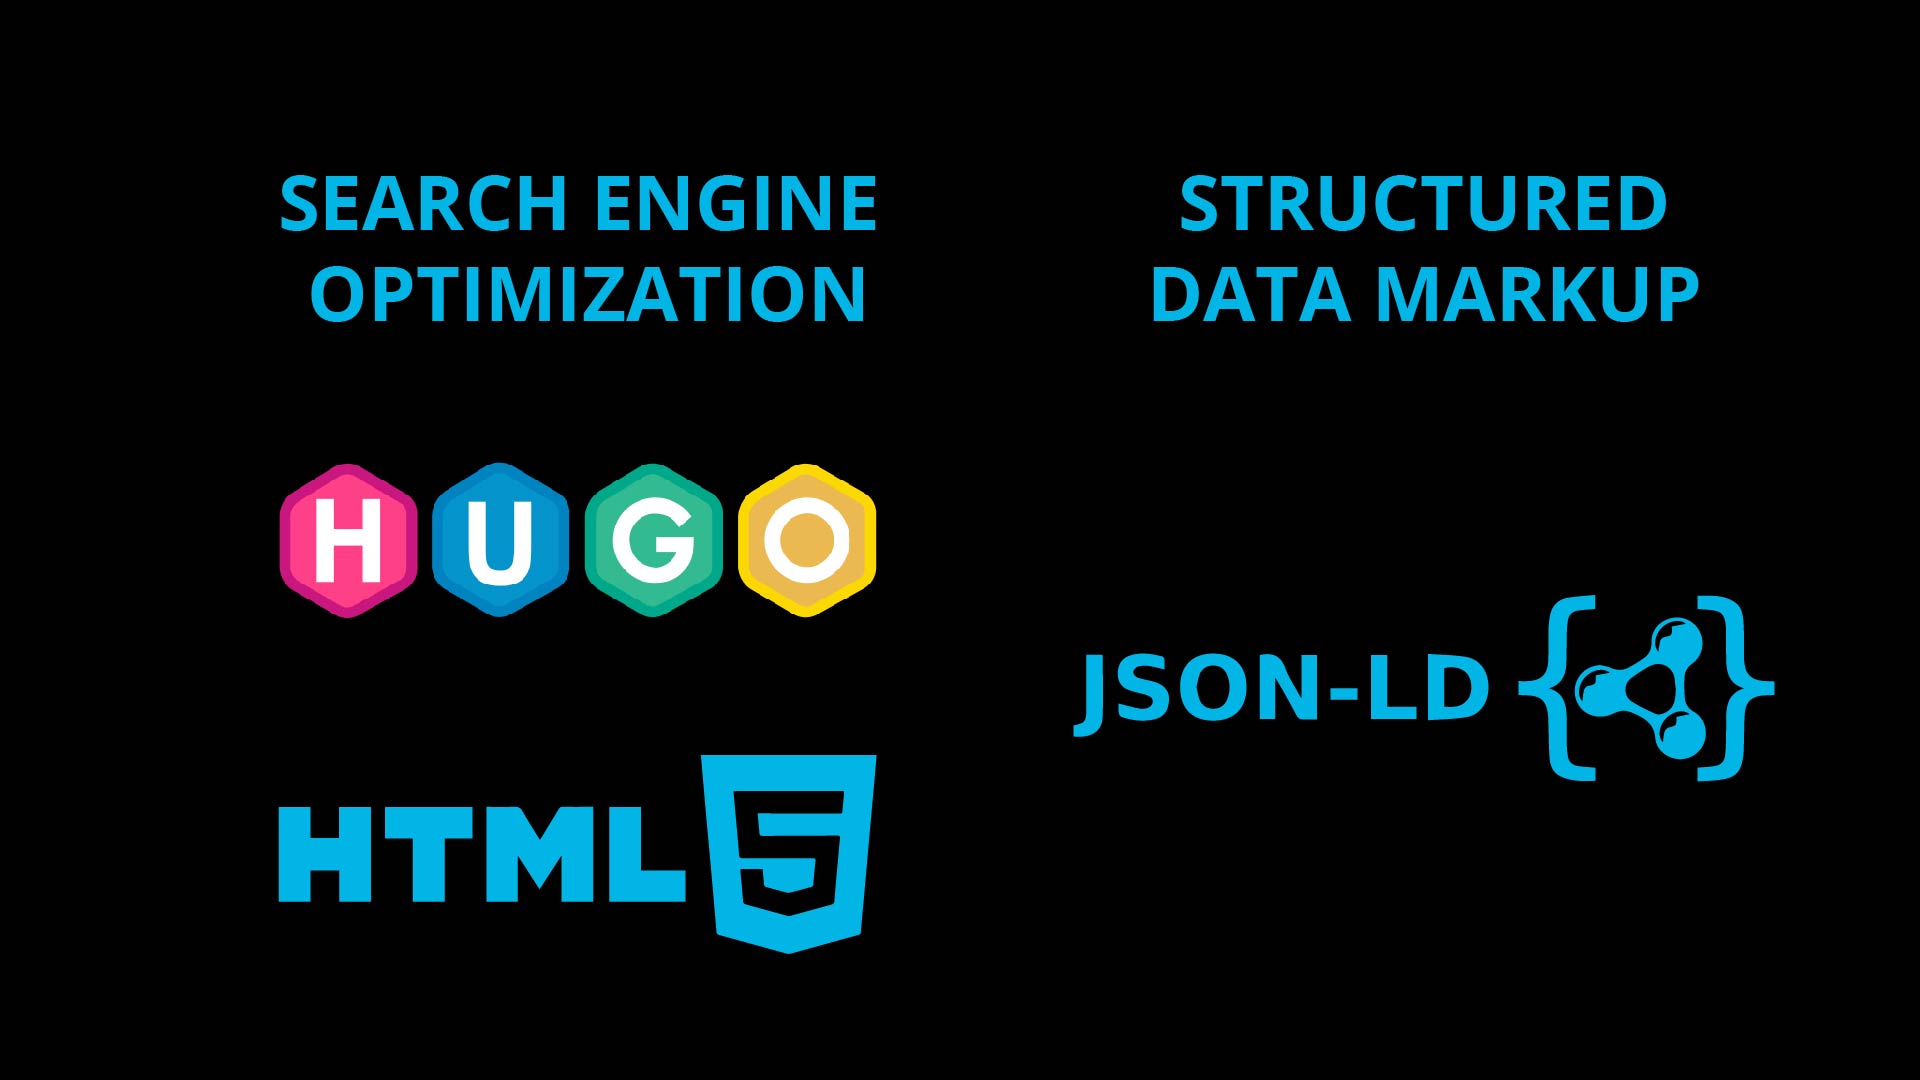 Image for SEO With Hugo (4) - Structured Data Markup hero section